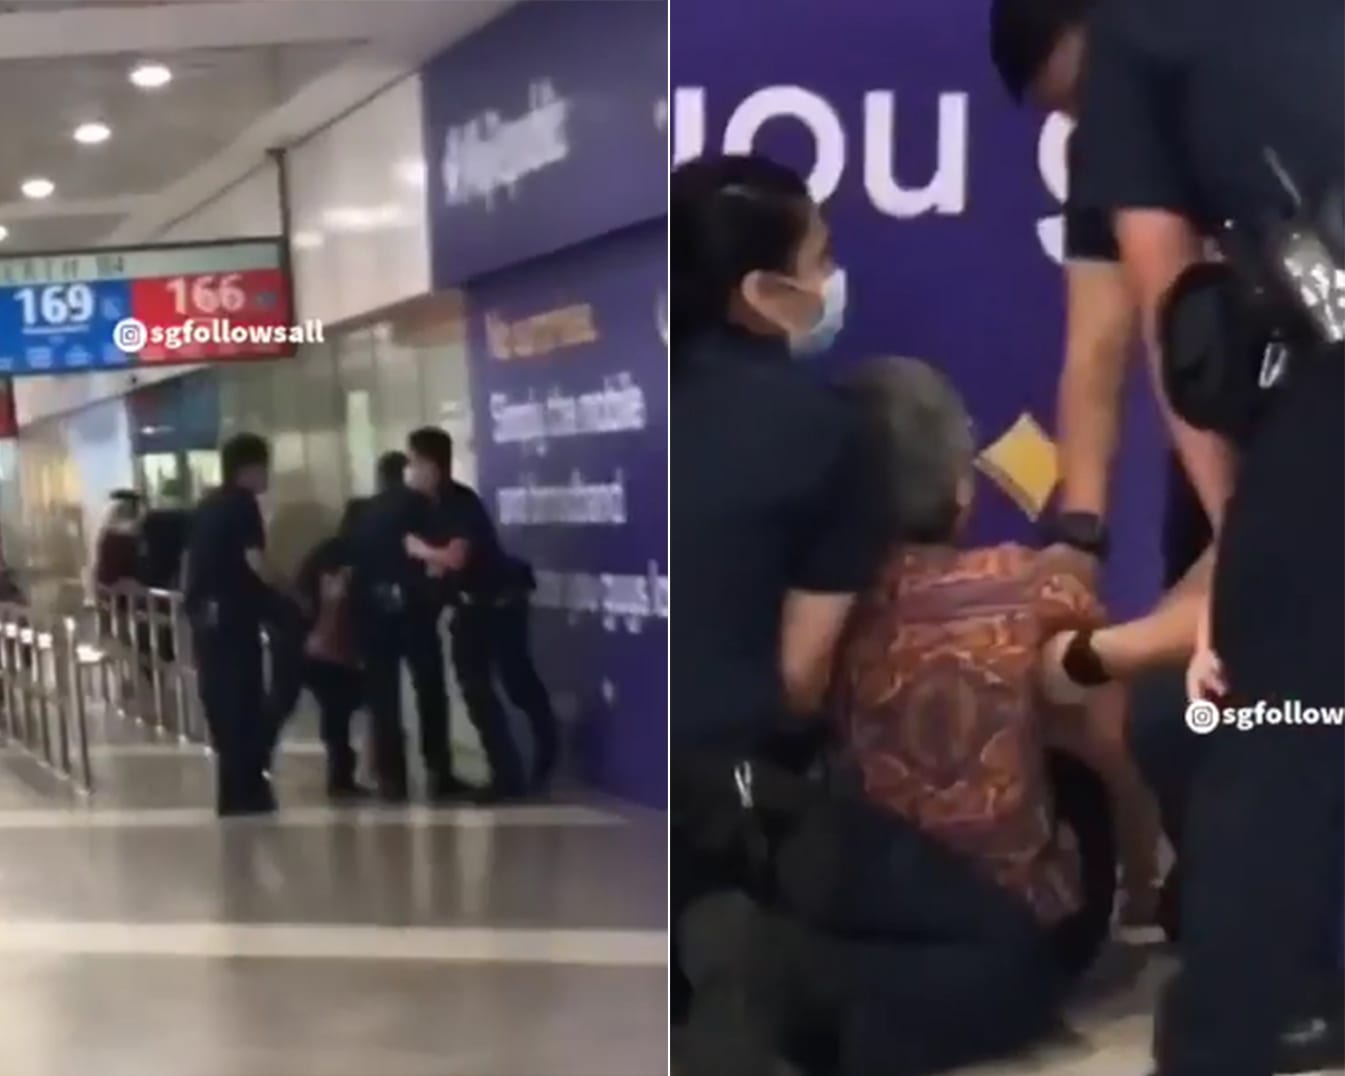 Police refute claims of officers manhandling woman at AMK Hub as ‘categorically untrue’